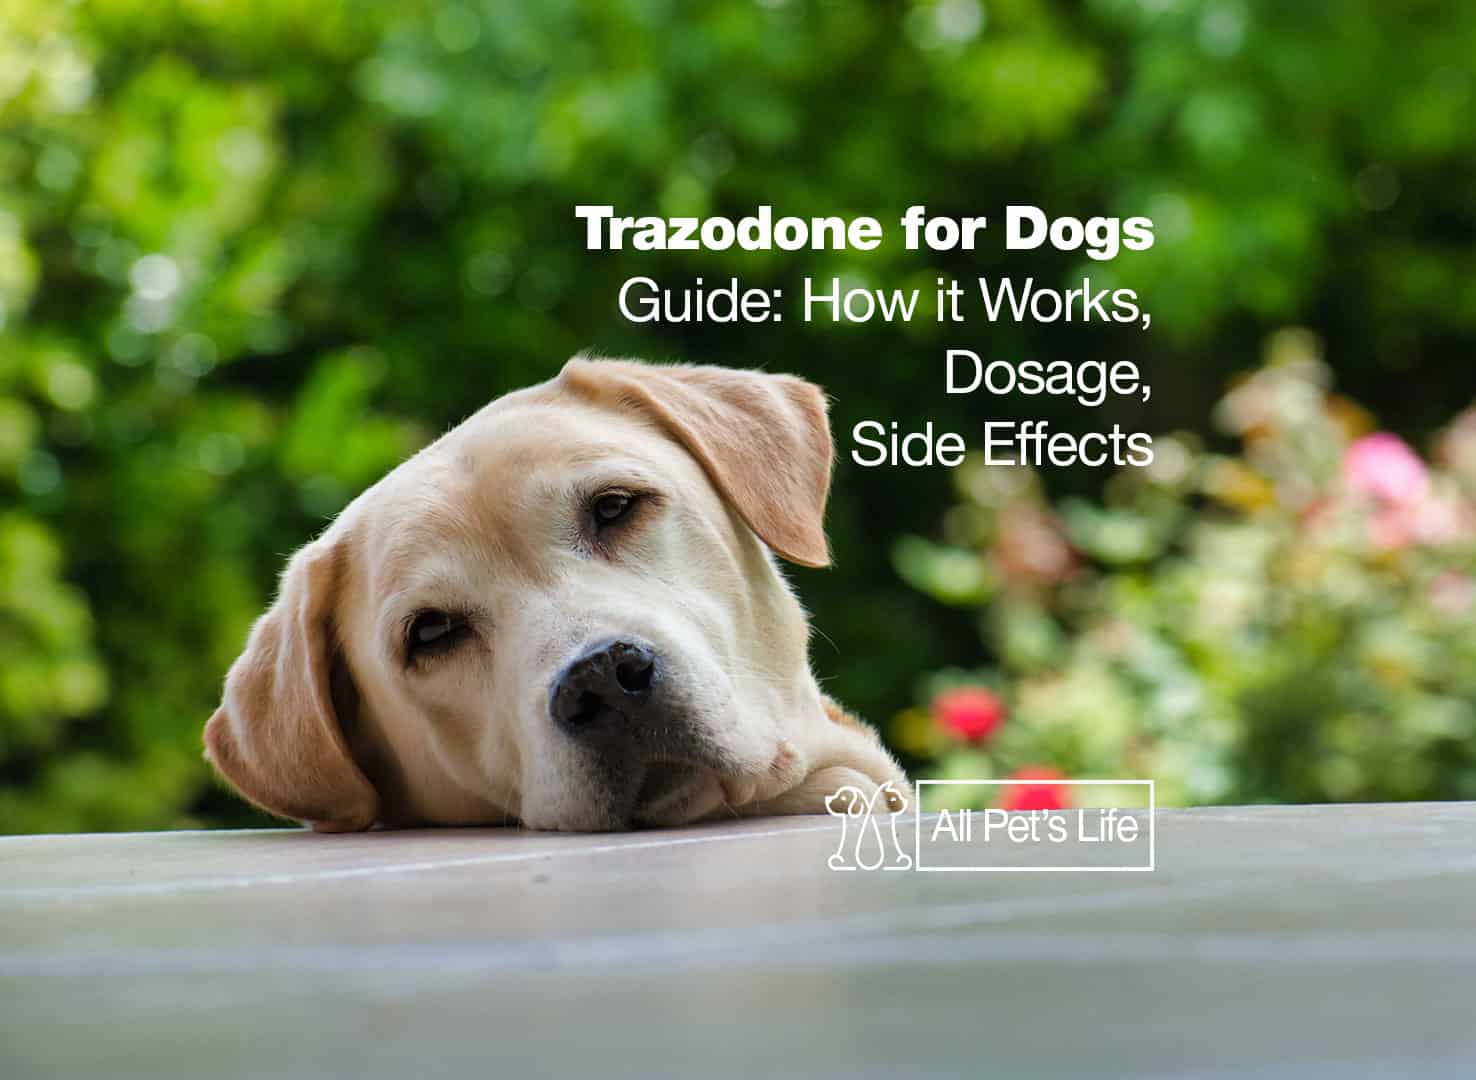 Trazodone for dogs guide: 2023 dosage & side effects - All Pet's Life